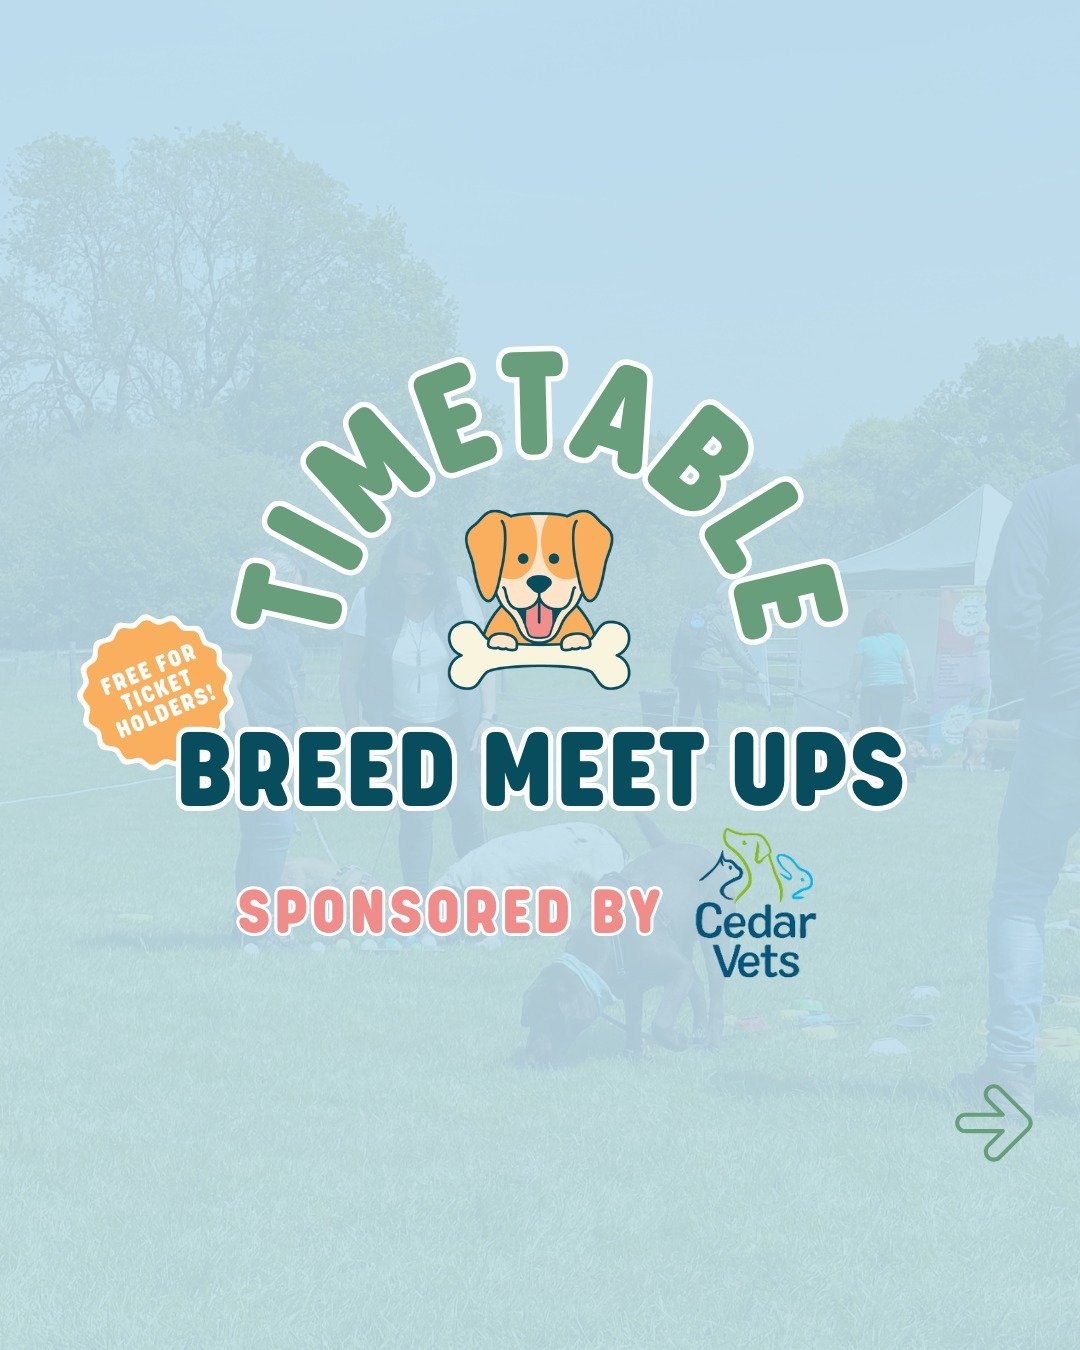 Our Breed Meet Up timetable is now out 🎉Supported by wonderful @cedarvets

With a clinical team at Dogs Day Out they can offer great FREE advice on how best to care for every breed of dog🐶 

You can get involved too and meet owners of dogs like you